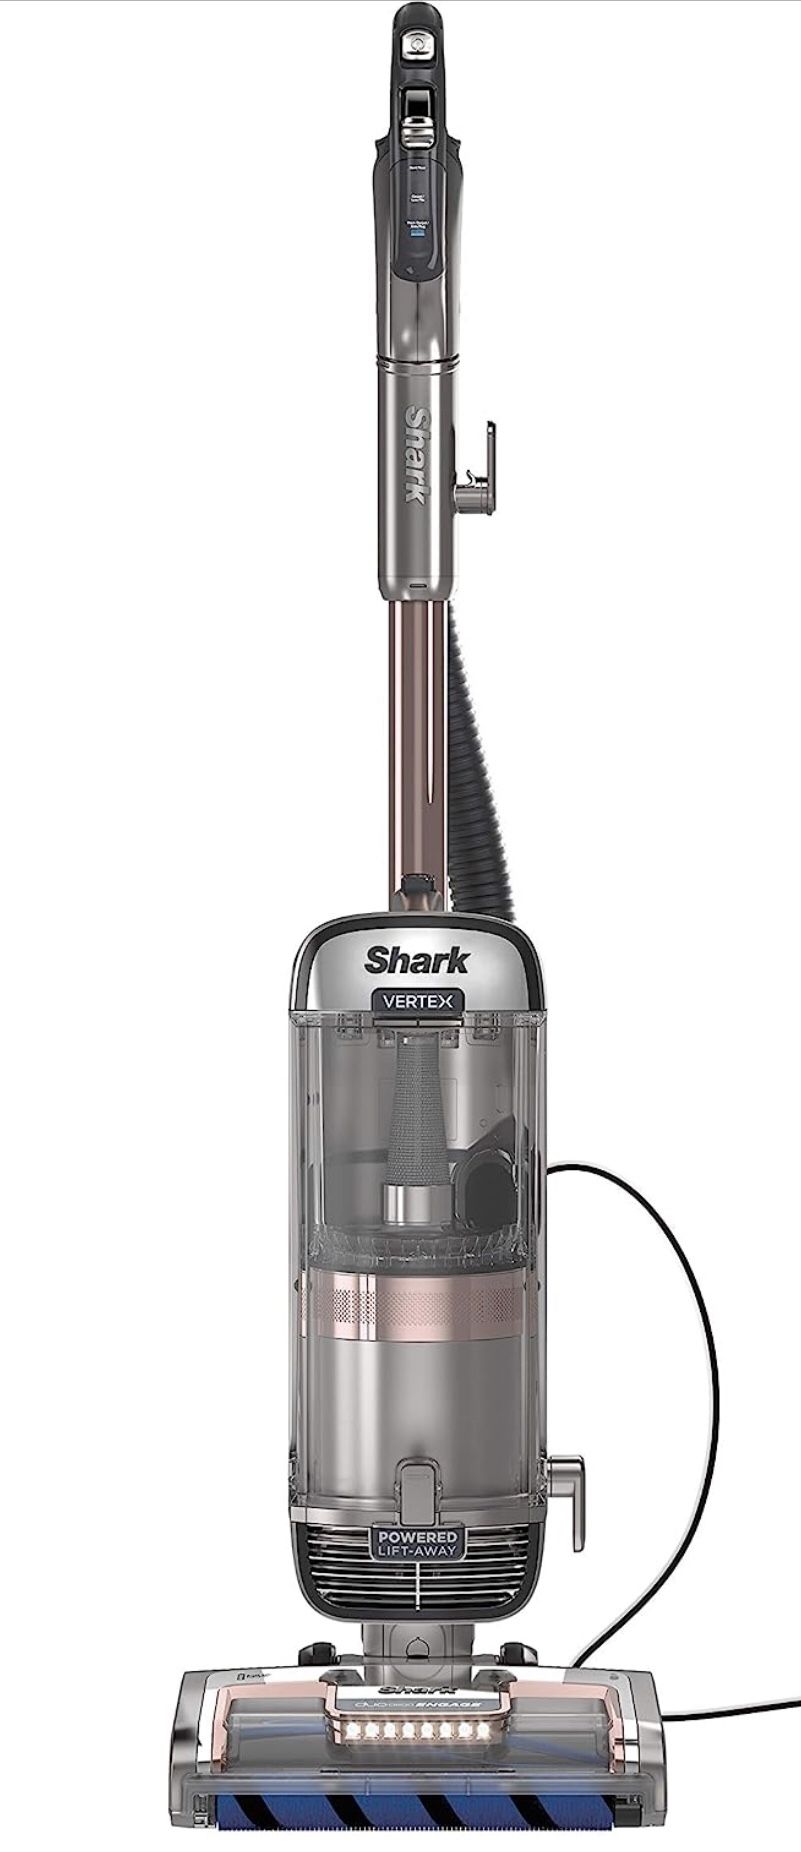 Shark AZ2002 Vertex Powered Lift-Away Upright Vacuum with DuoClean PowerFins, Self-Cleaning Brushroll, Large Dust Cup, Pet Crevice Tool, Dusting Brush